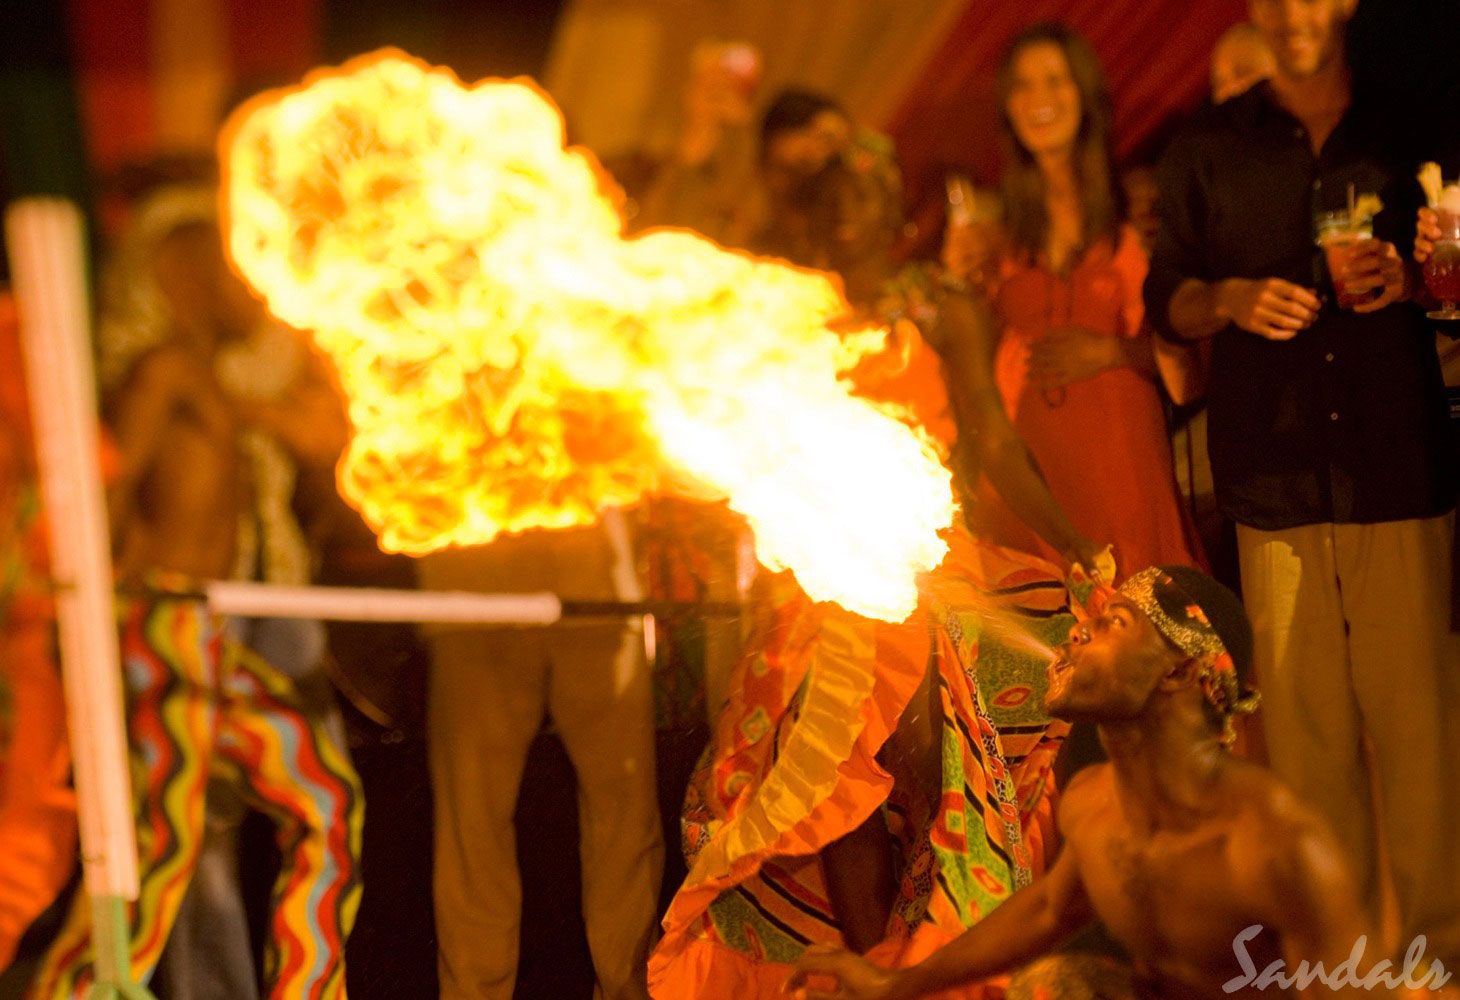 fire show at Sandals resorts